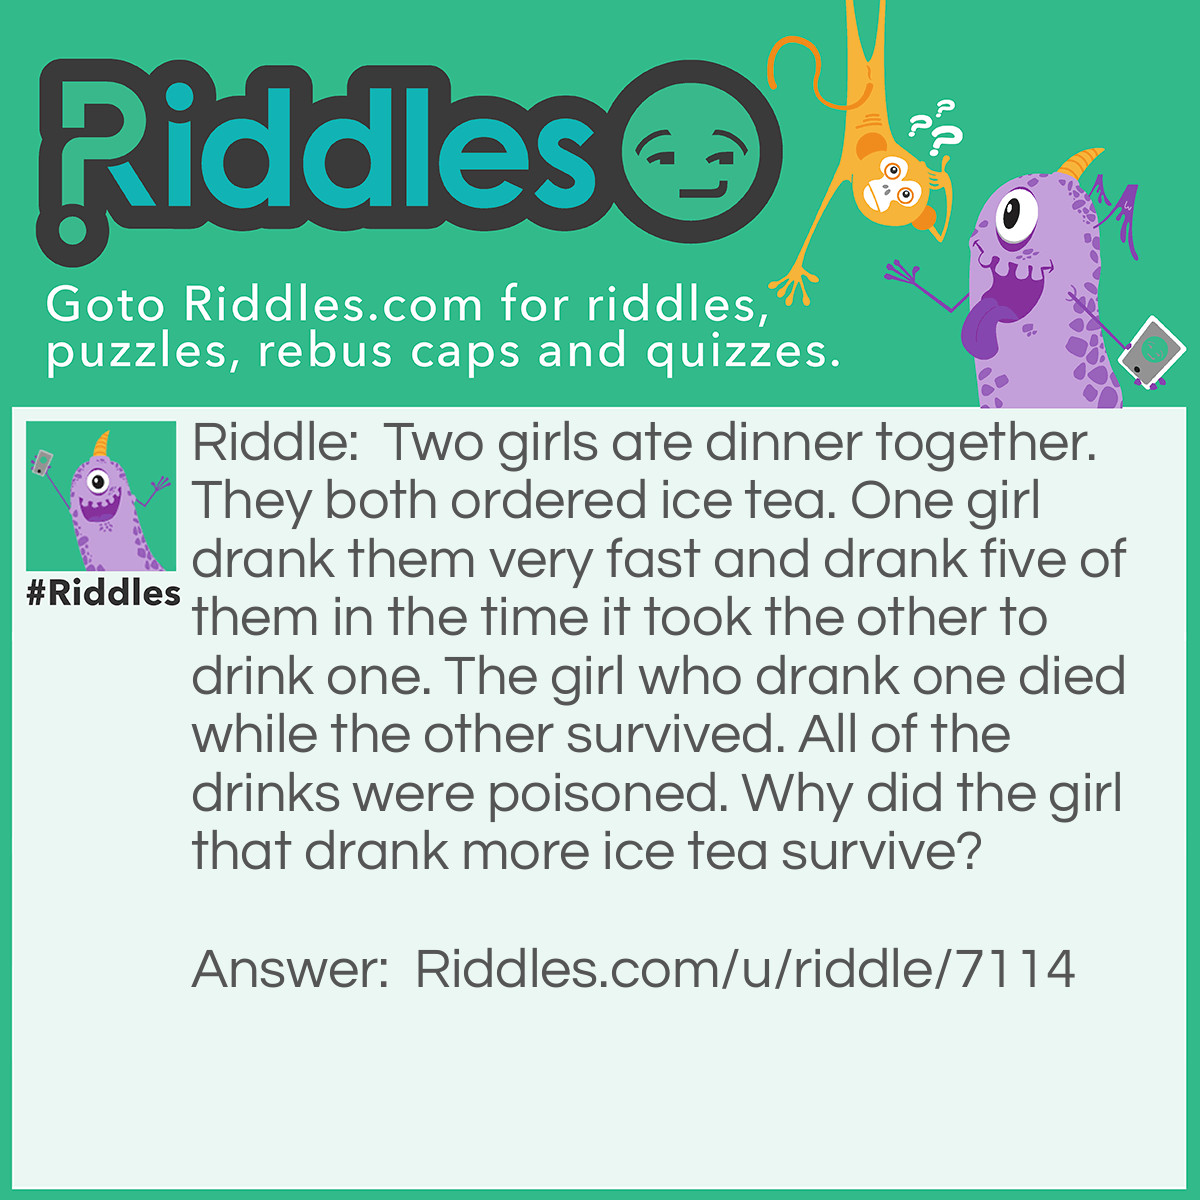 Riddle: Two girls ate dinner together. They both ordered ice tea. One girl drank them very fast and drank five of them in the time it took the other to drink one. The girl who drank one died while the other survived. All of the drinks were poisoned. Why did the girl that drank more ice tea survive? Answer: The poison was in the ice.